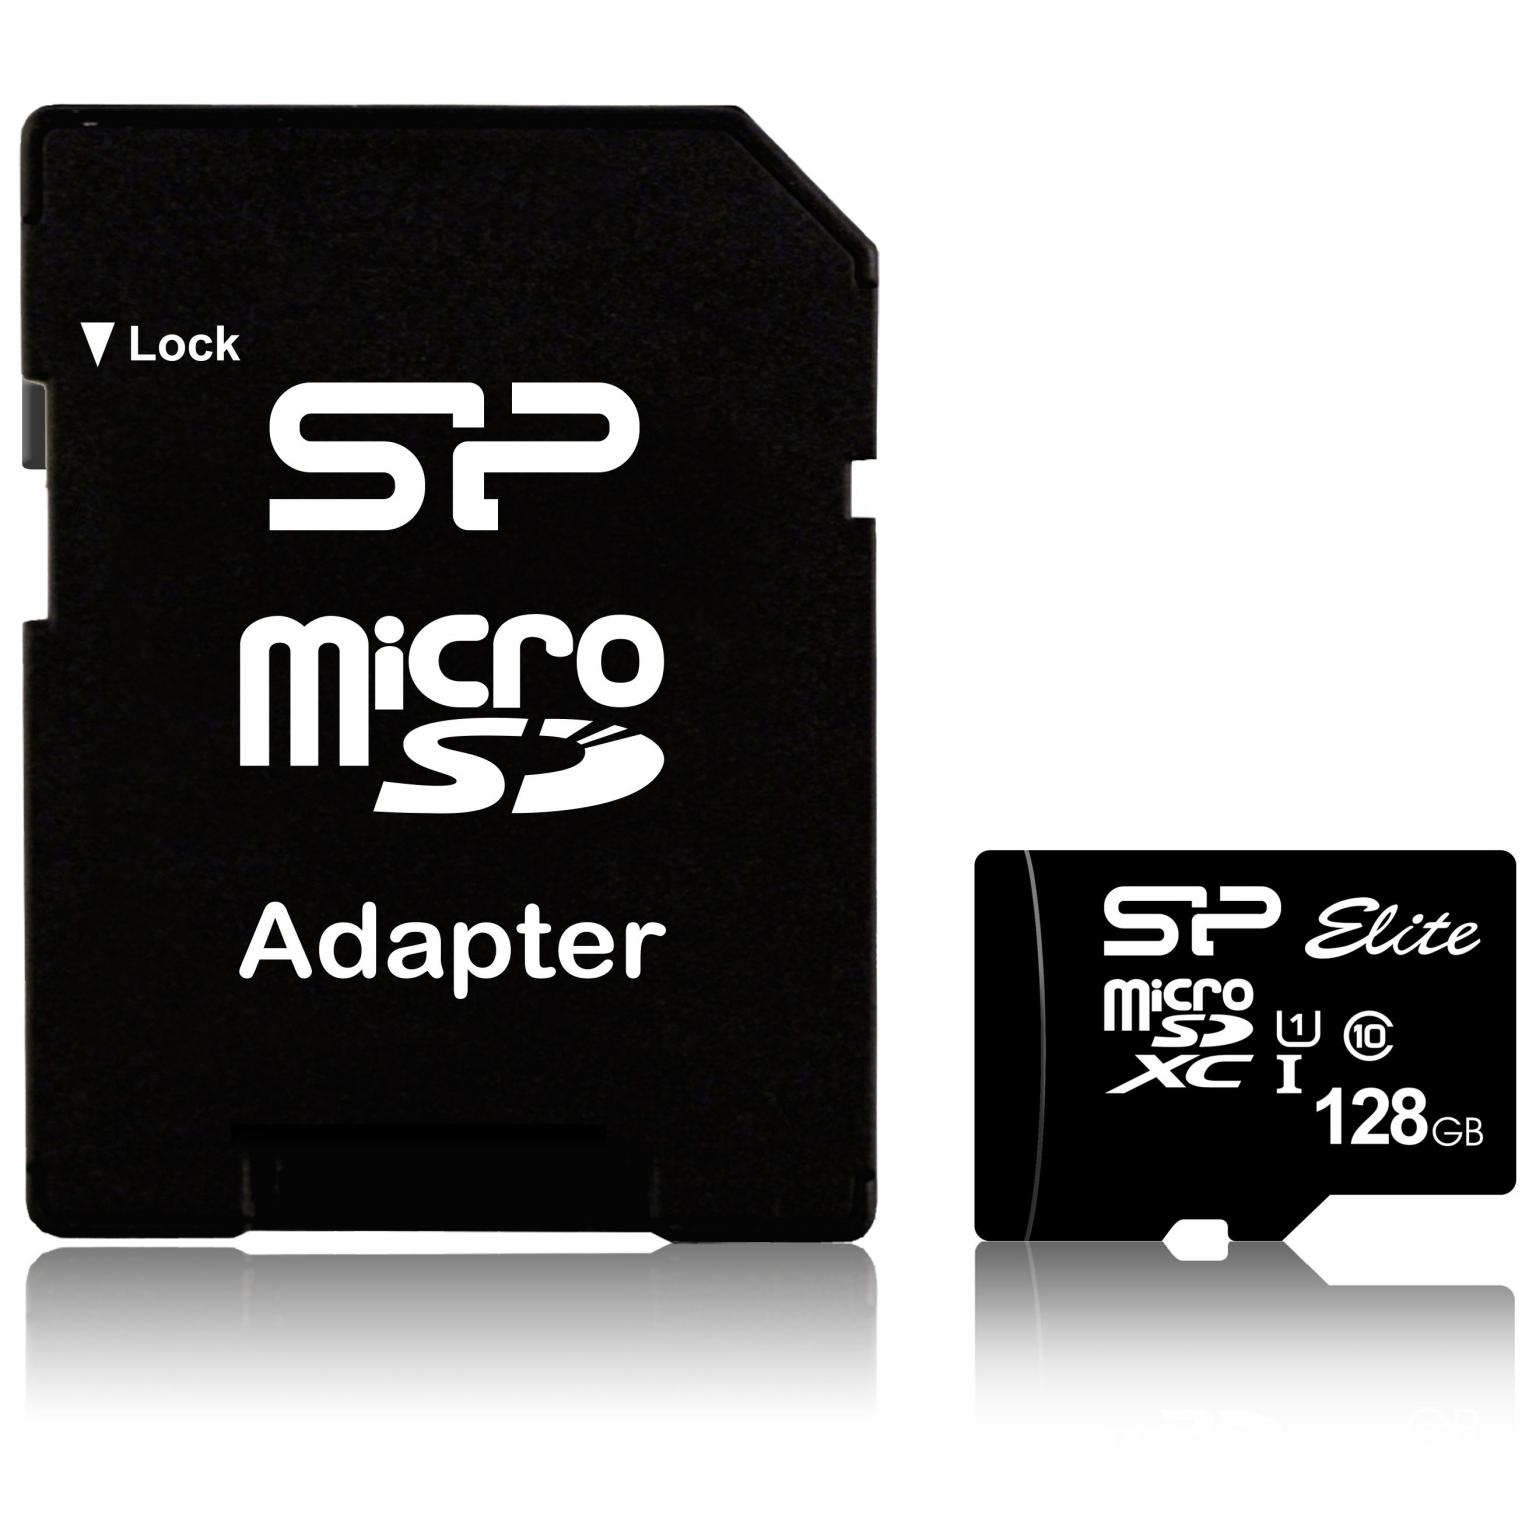 Silicon Power Micro SDHC incl. SD Adapter 128GB UHS-1 Class 10 - Silicon Power